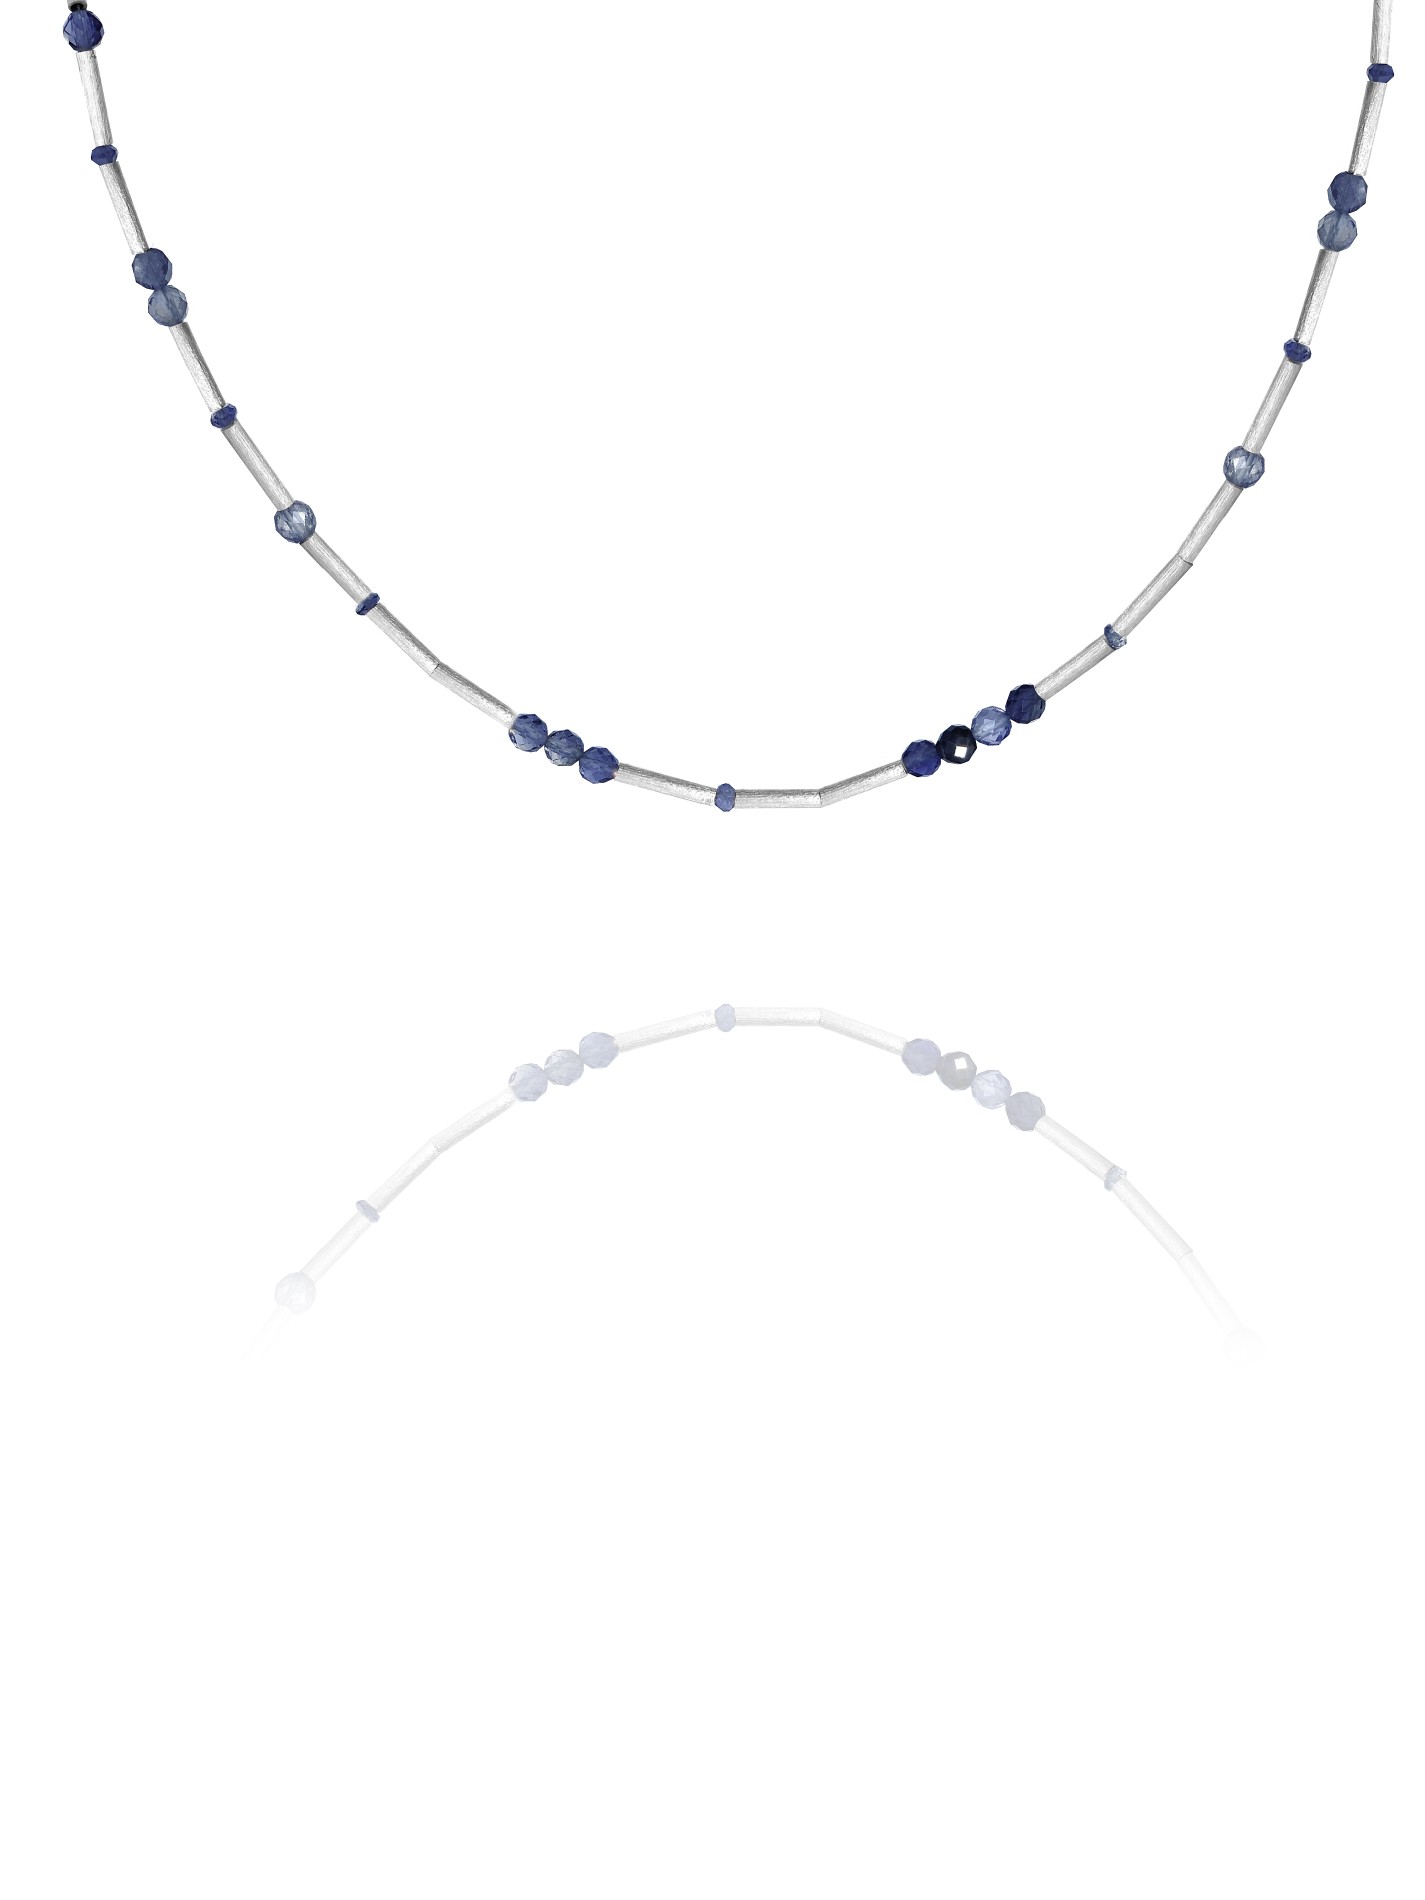 Stars necklace silver faceted iolite 84106 1